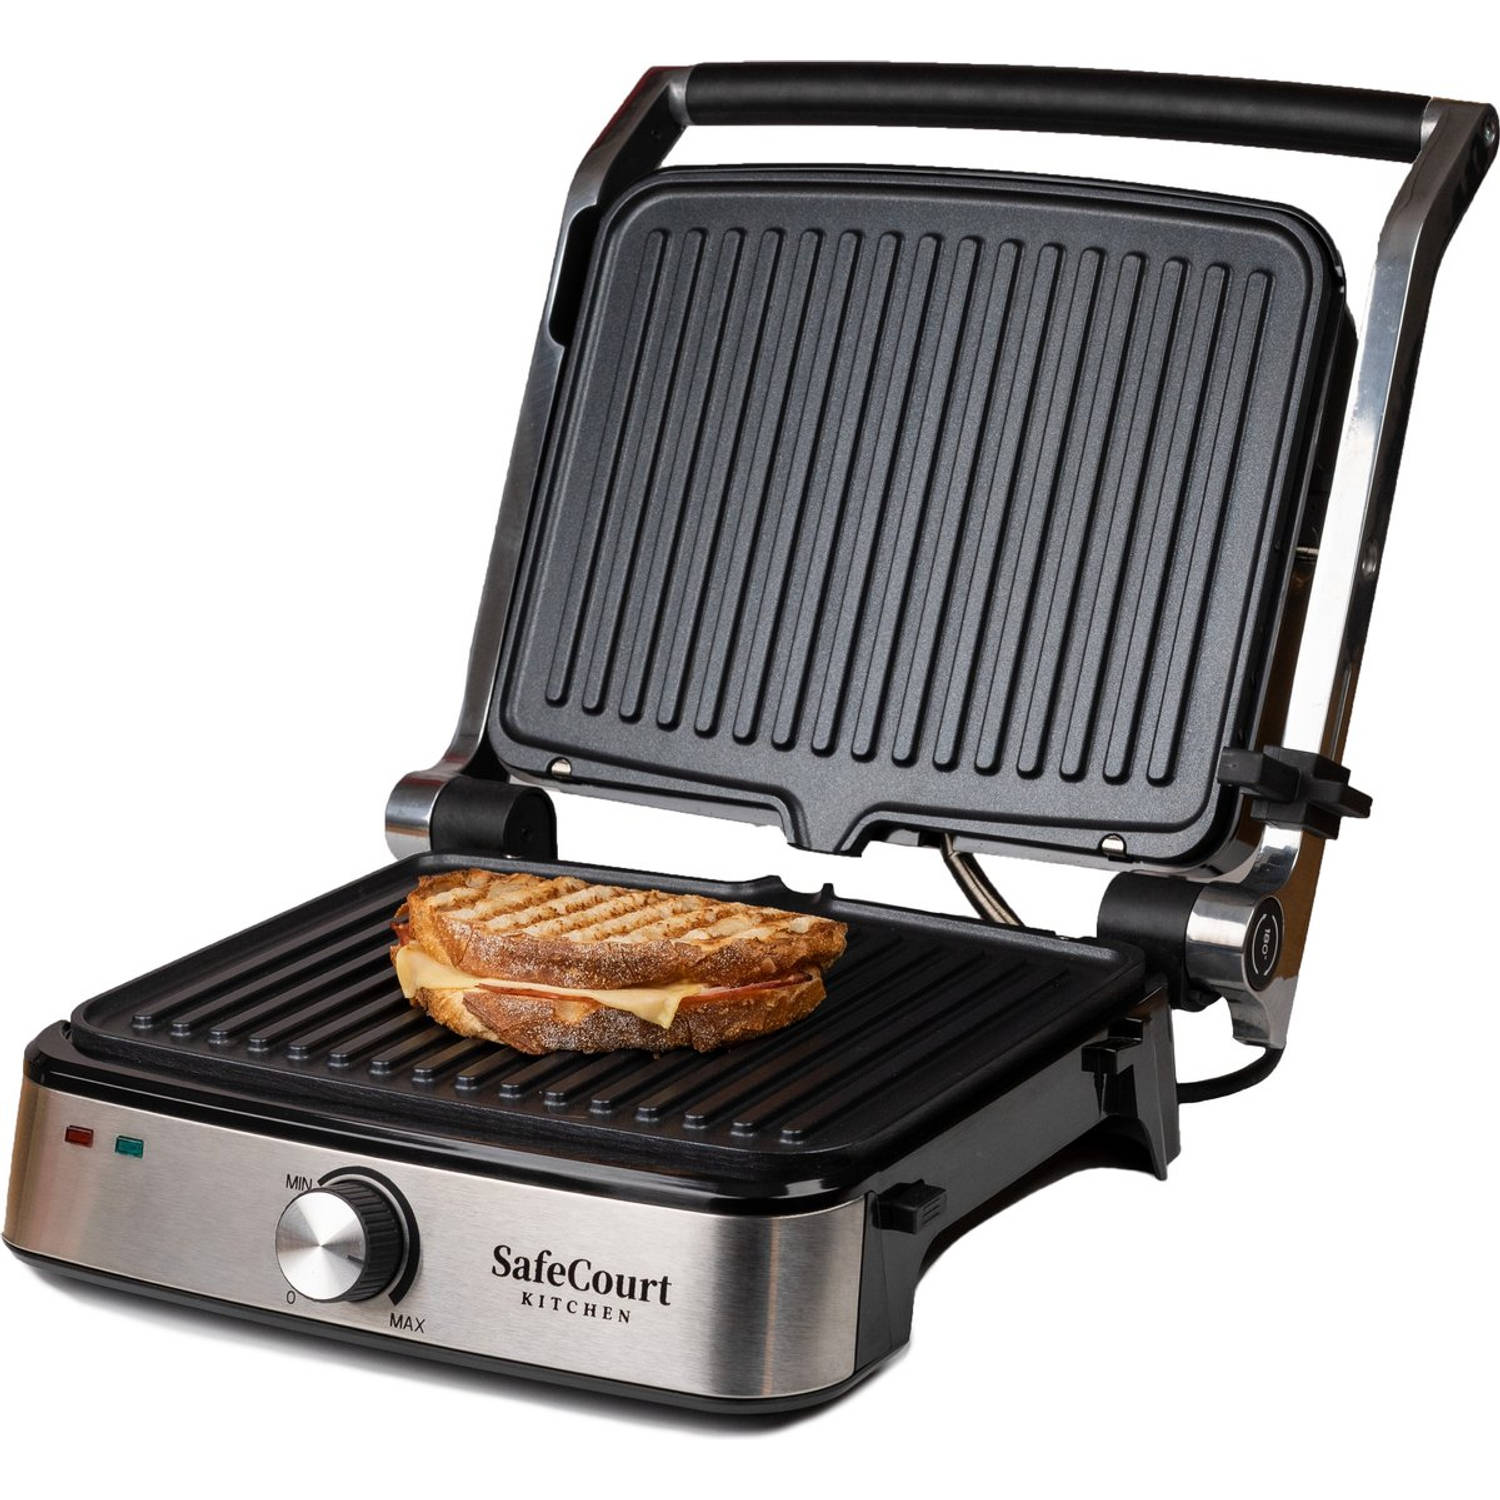 Safecourt Kitchen Contactgrill Compact Cg200 Tosti Apparaat Grill Apparaat Uitneembare Platen